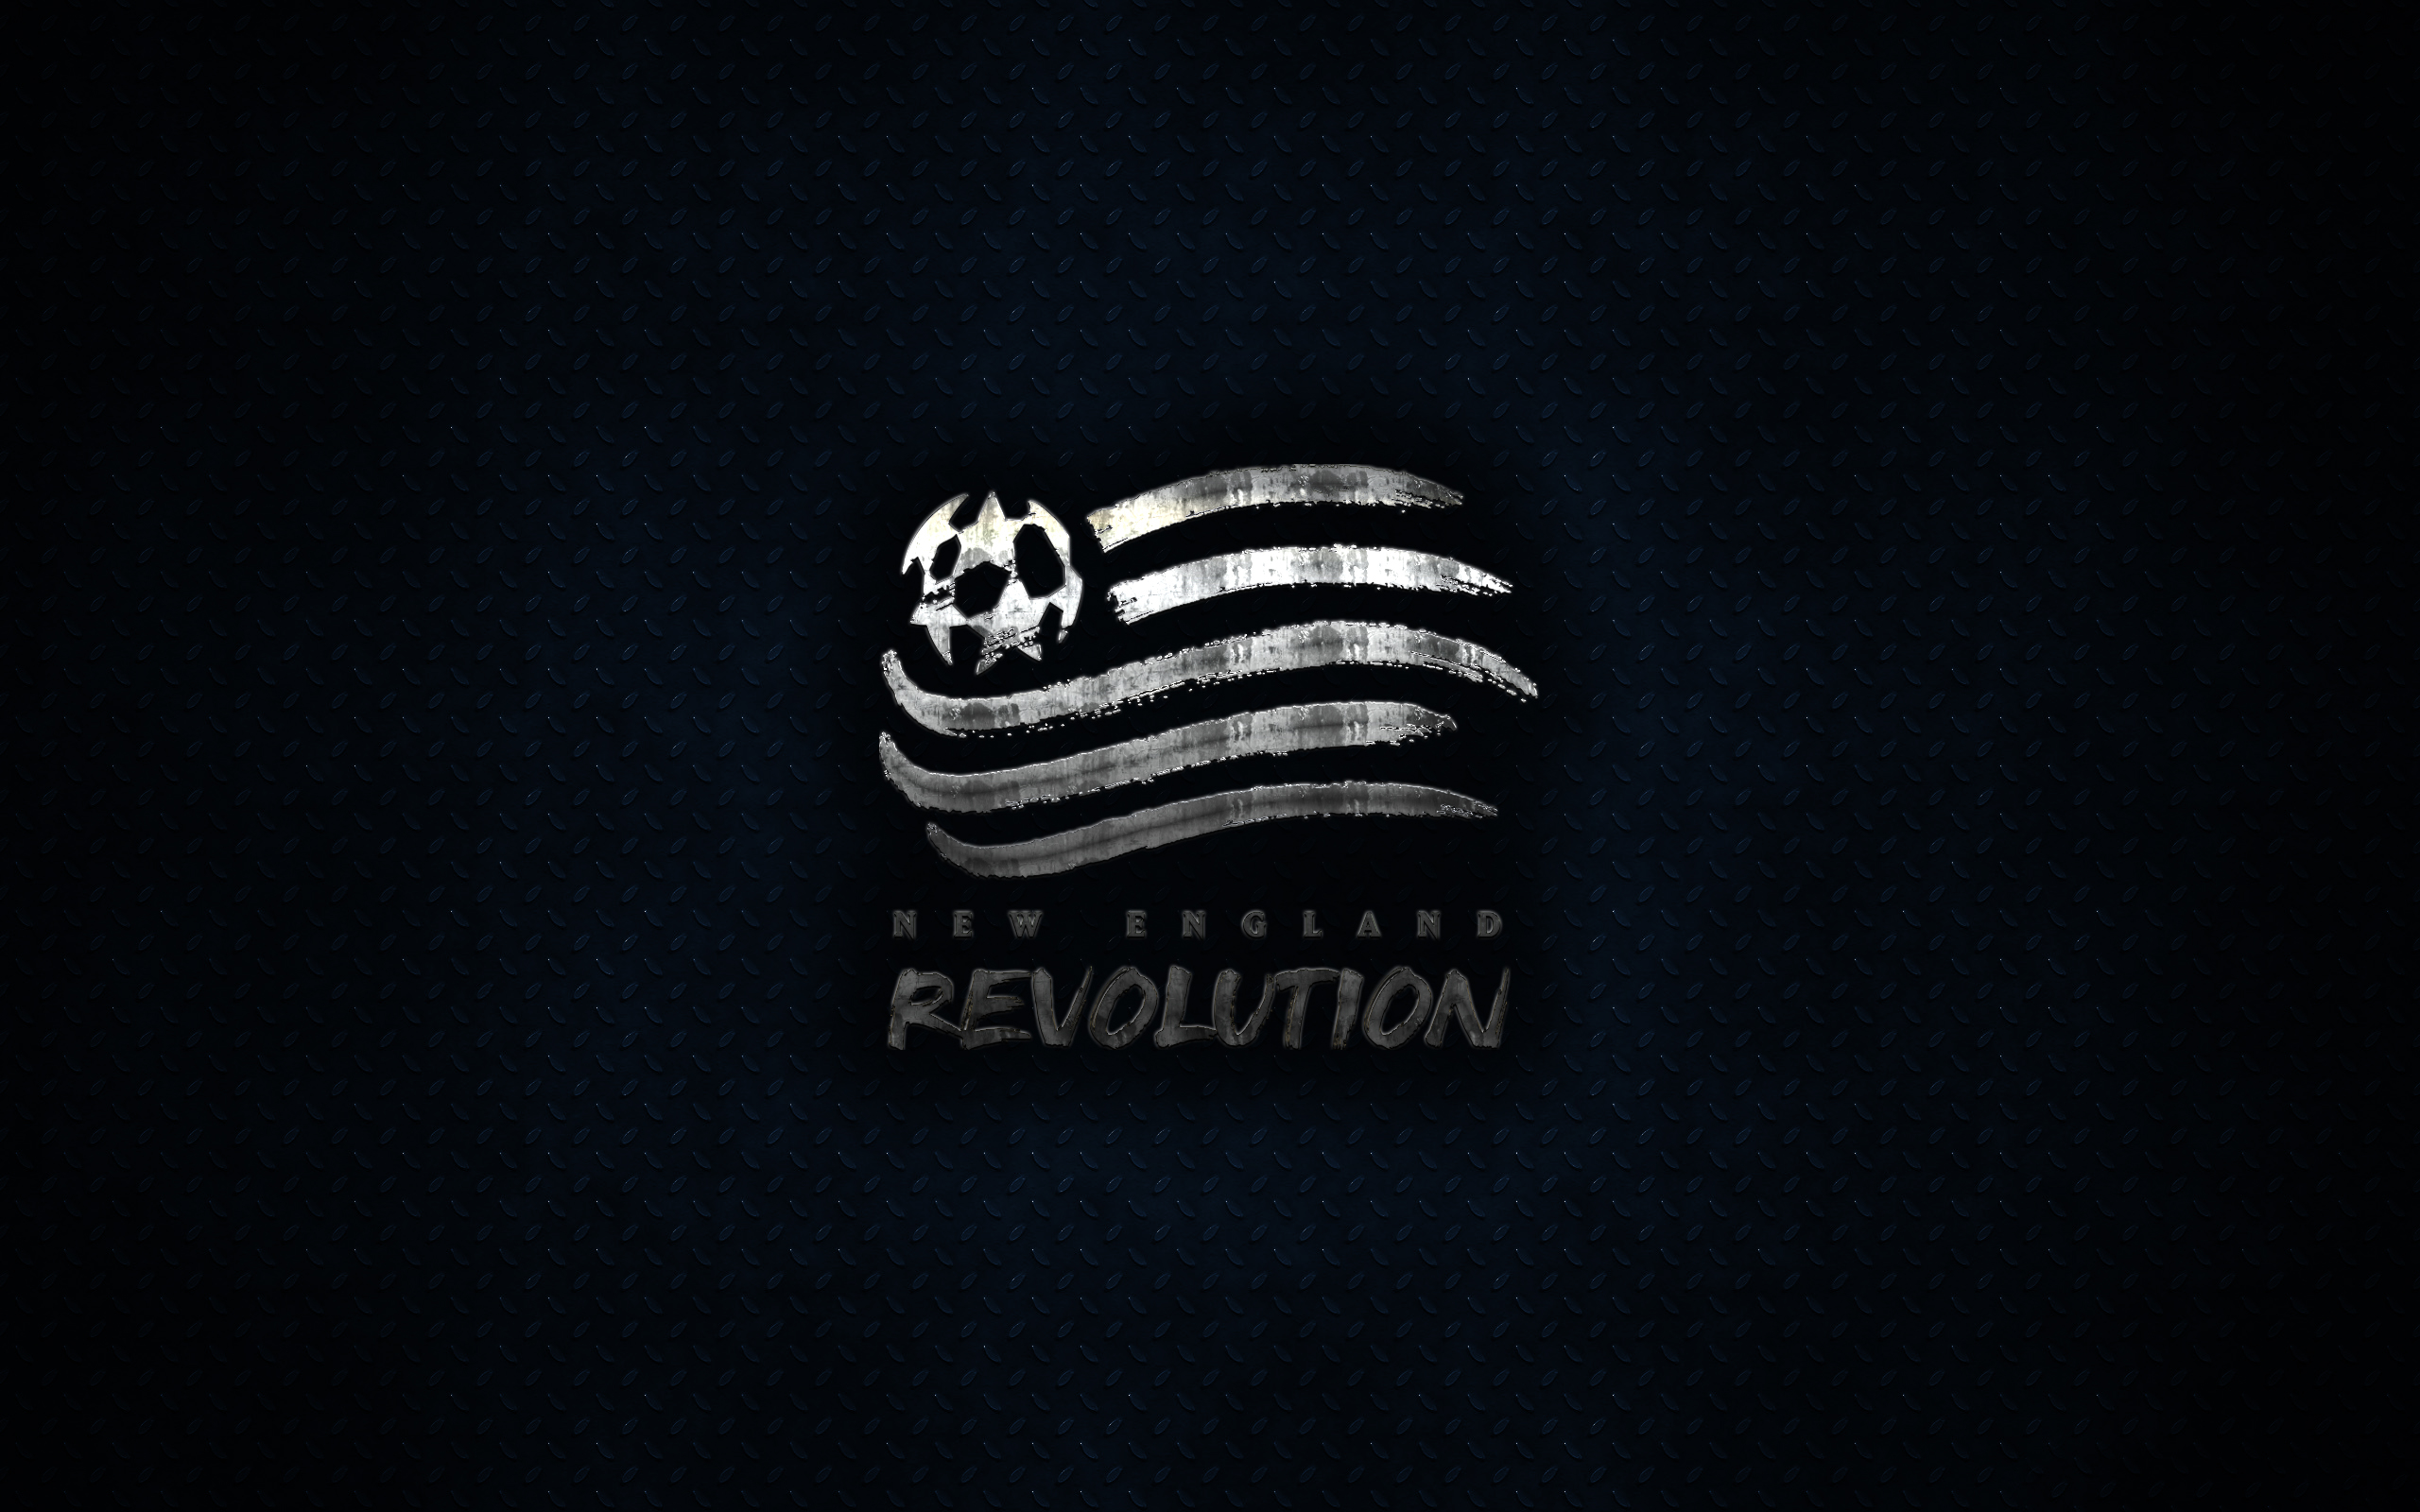 10+ New England Revolution HD Wallpapers and Backgrounds